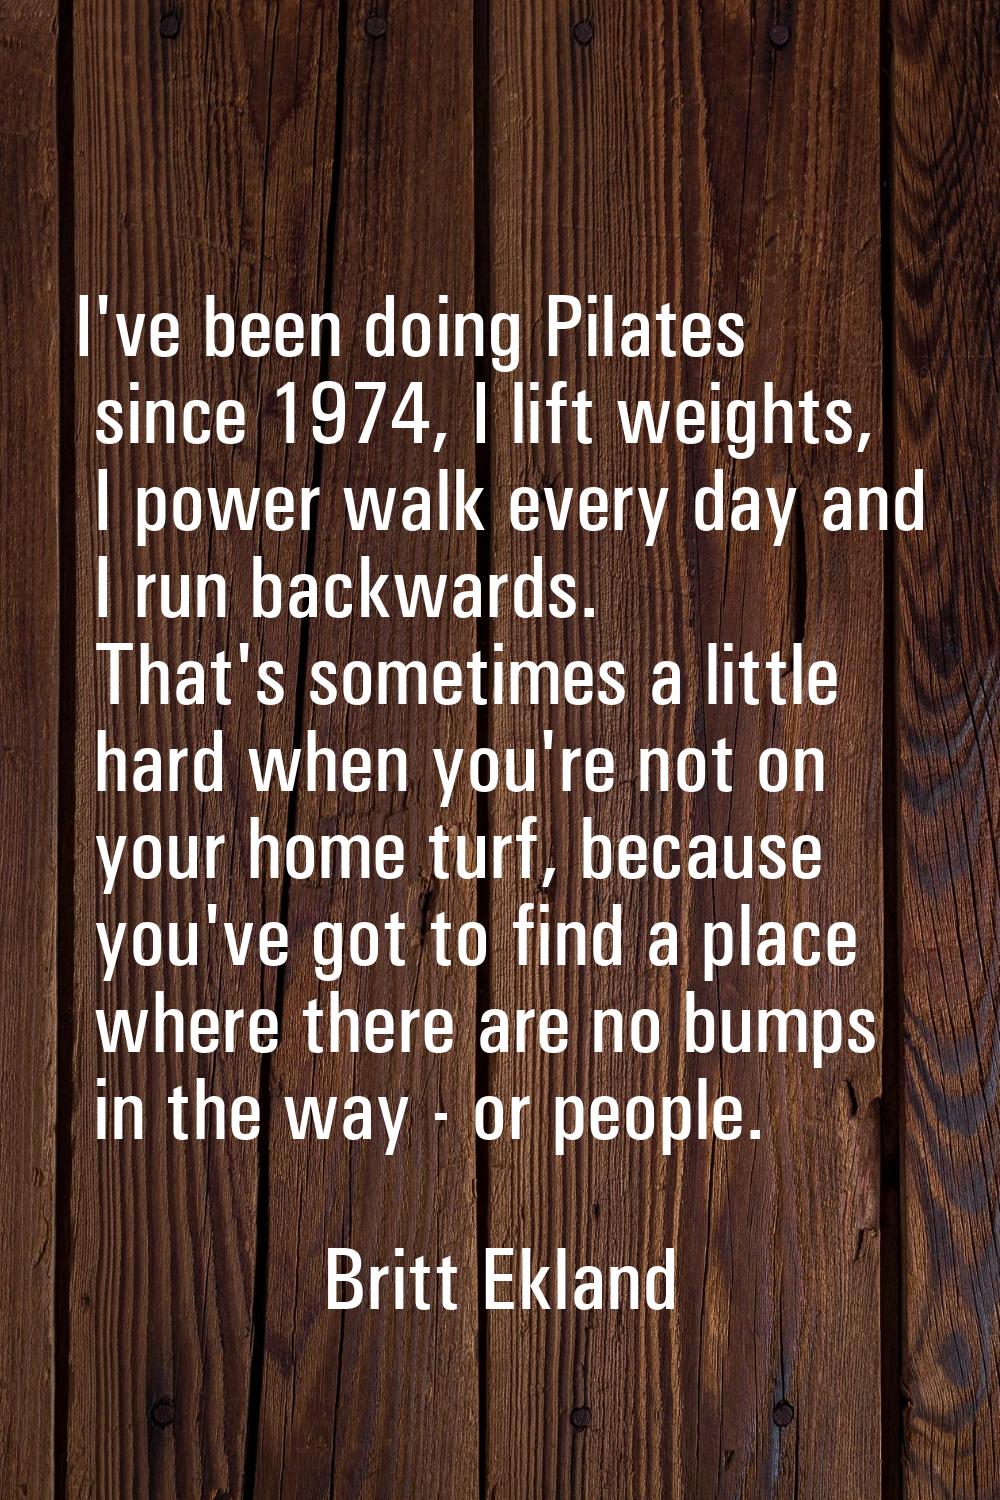 I've been doing Pilates since 1974, I lift weights, I power walk every day and I run backwards. Tha